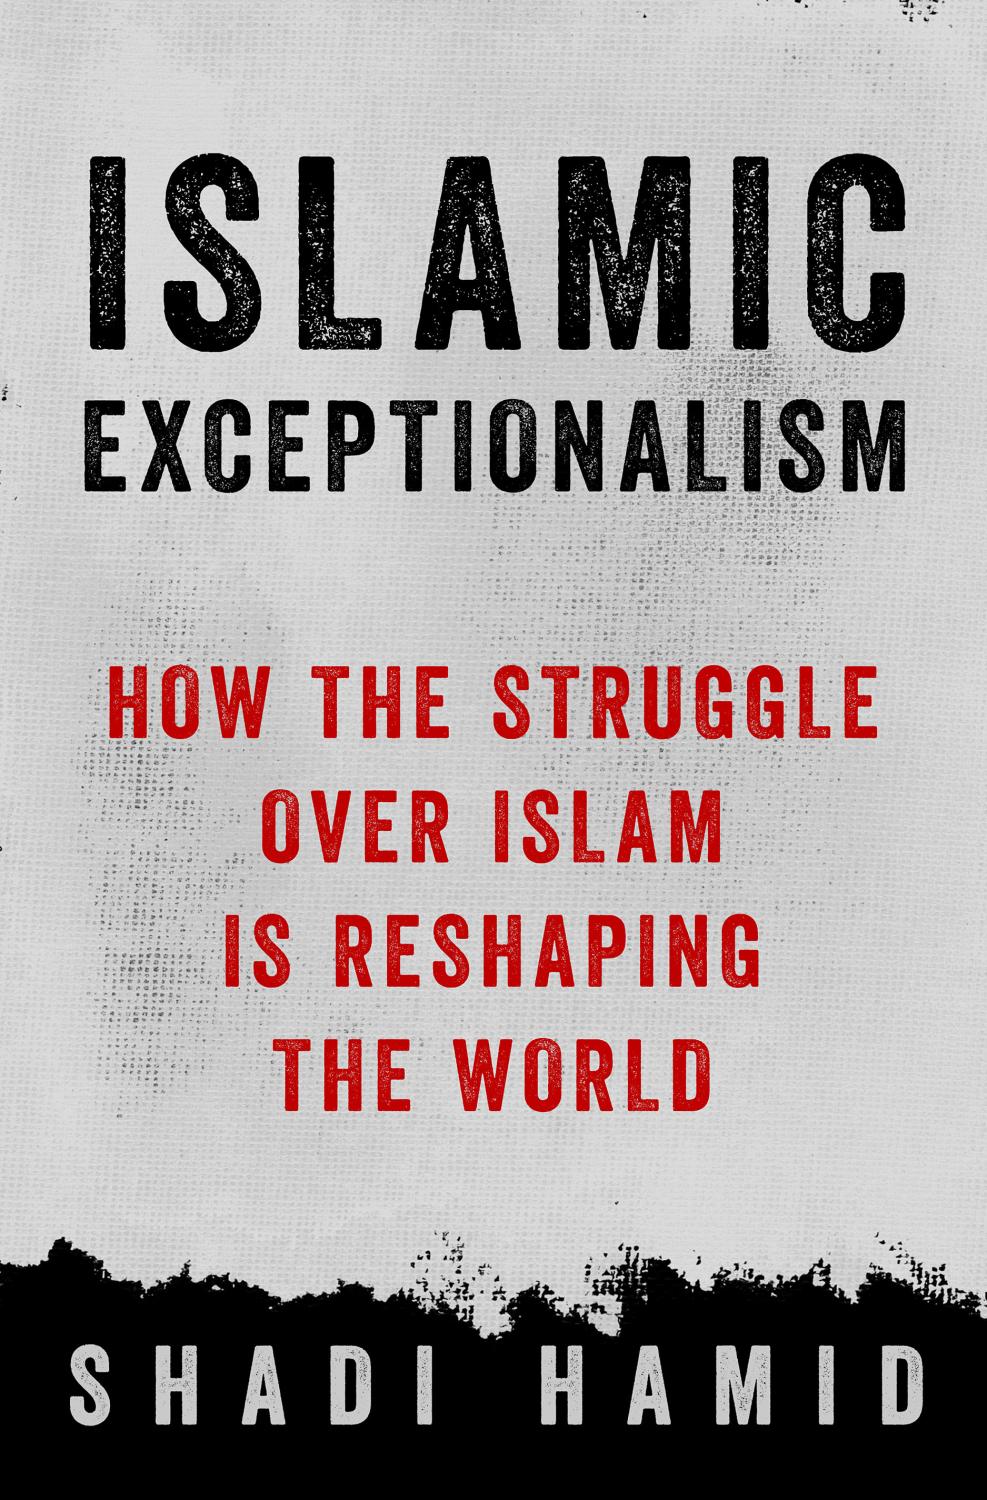 "Islamic Exceptionalism: How the Struggle Over Islam Is Reshaping the World" (St. Martin's Press, 2016) by Shadi Hamid